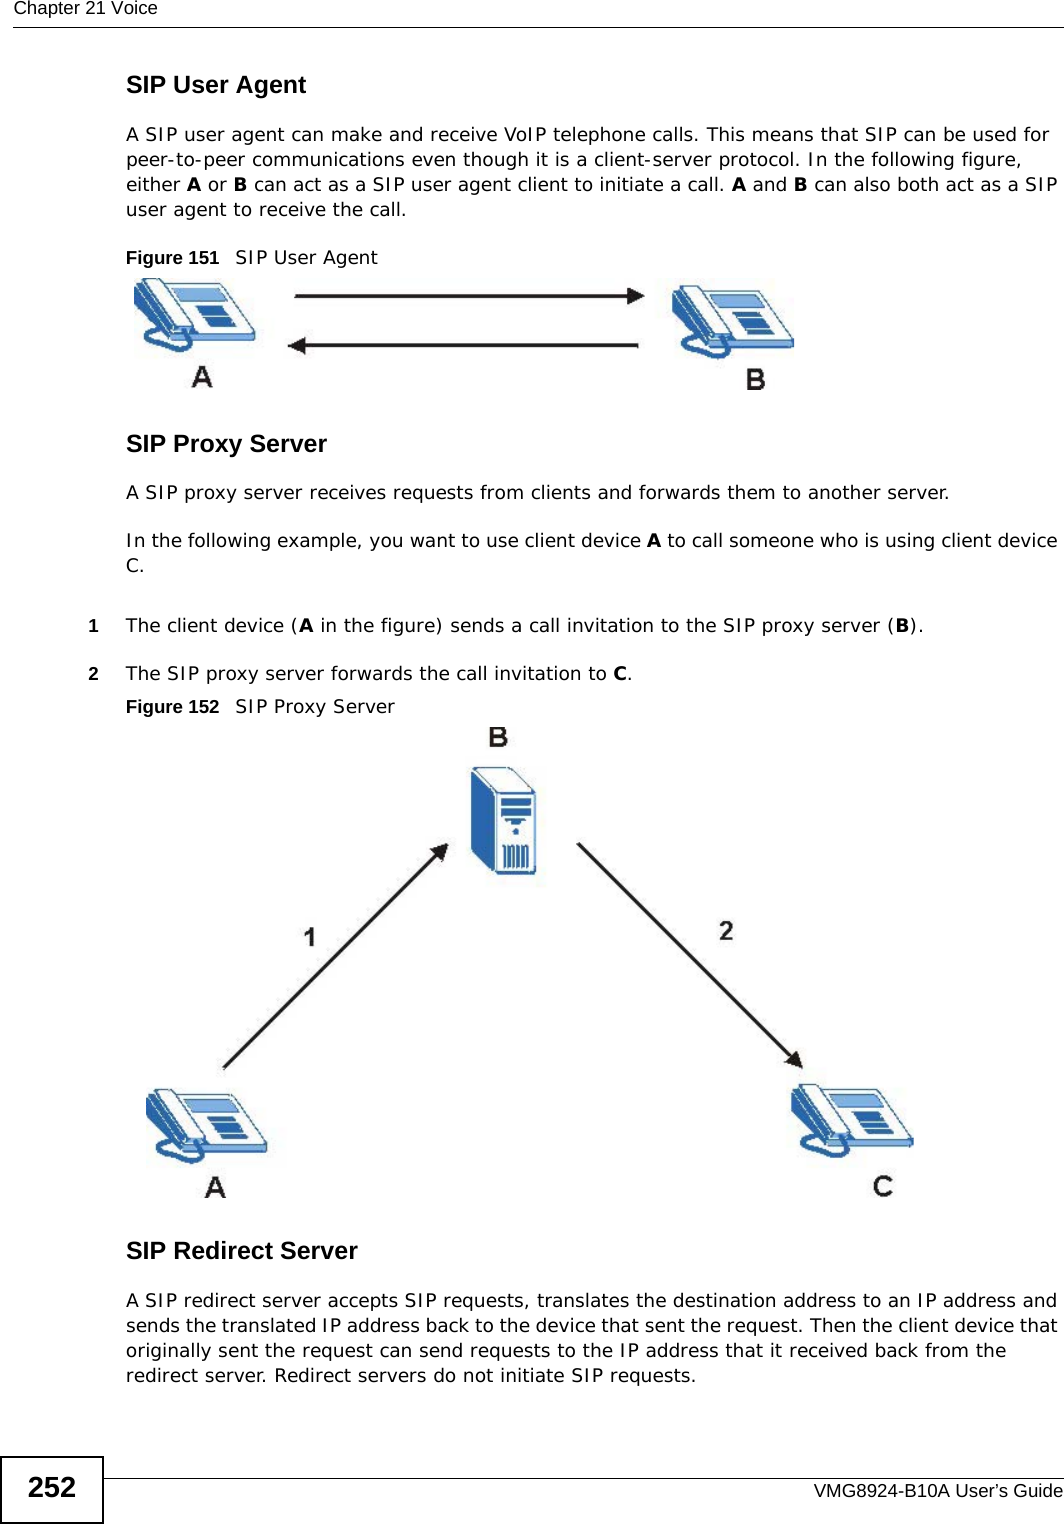 Chapter 21 VoiceVMG8924-B10A User’s Guide252SIP User AgentA SIP user agent can make and receive VoIP telephone calls. This means that SIP can be used for peer-to-peer communications even though it is a client-server protocol. In the following figure, either A or B can act as a SIP user agent client to initiate a call. A and B can also both act as a SIP user agent to receive the call.Figure 151   SIP User AgentSIP Proxy ServerA SIP proxy server receives requests from clients and forwards them to another server.In the following example, you want to use client device A to call someone who is using client device C. 1The client device (A in the figure) sends a call invitation to the SIP proxy server (B).2The SIP proxy server forwards the call invitation to C.Figure 152   SIP Proxy ServerSIP Redirect ServerA SIP redirect server accepts SIP requests, translates the destination address to an IP address and sends the translated IP address back to the device that sent the request. Then the client device that originally sent the request can send requests to the IP address that it received back from the redirect server. Redirect servers do not initiate SIP requests. 